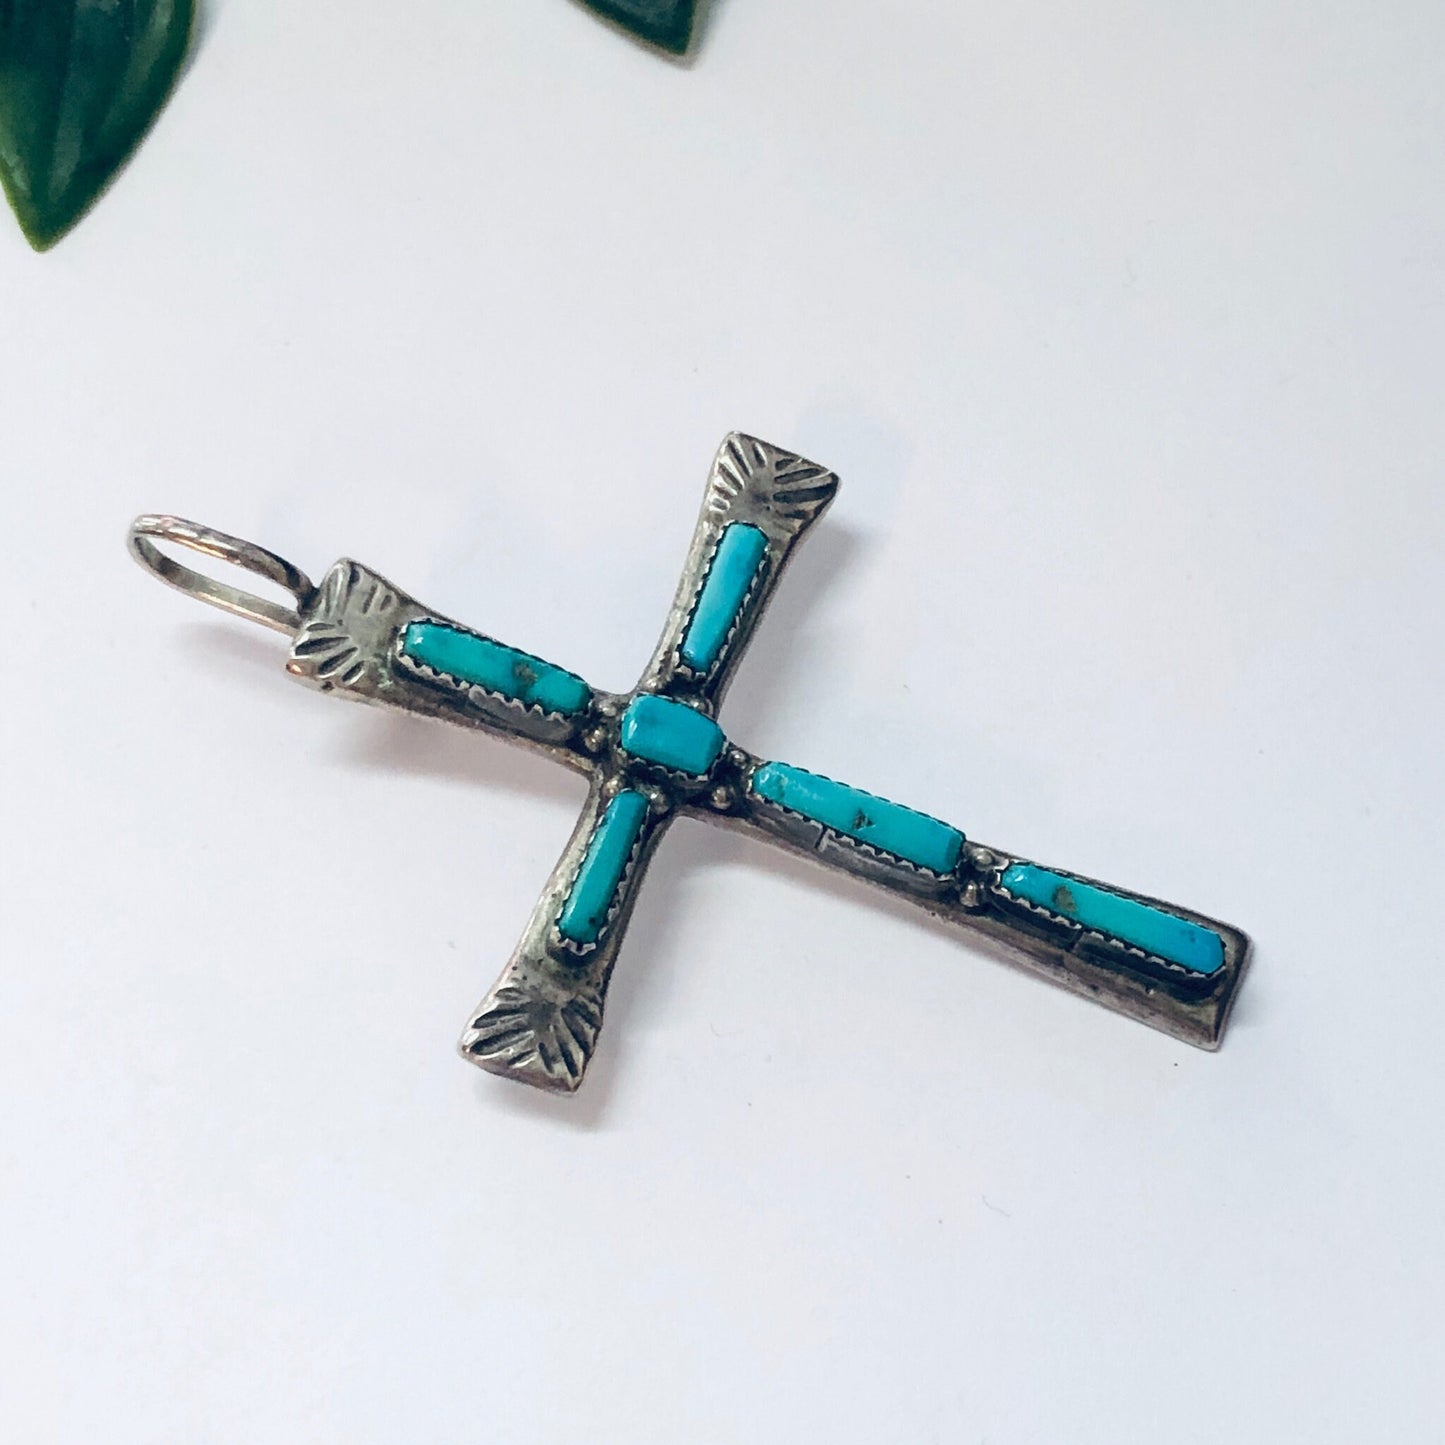 Vintage Zuni silver cross pendant with turquoise inlays, religious jewelry from L IULE